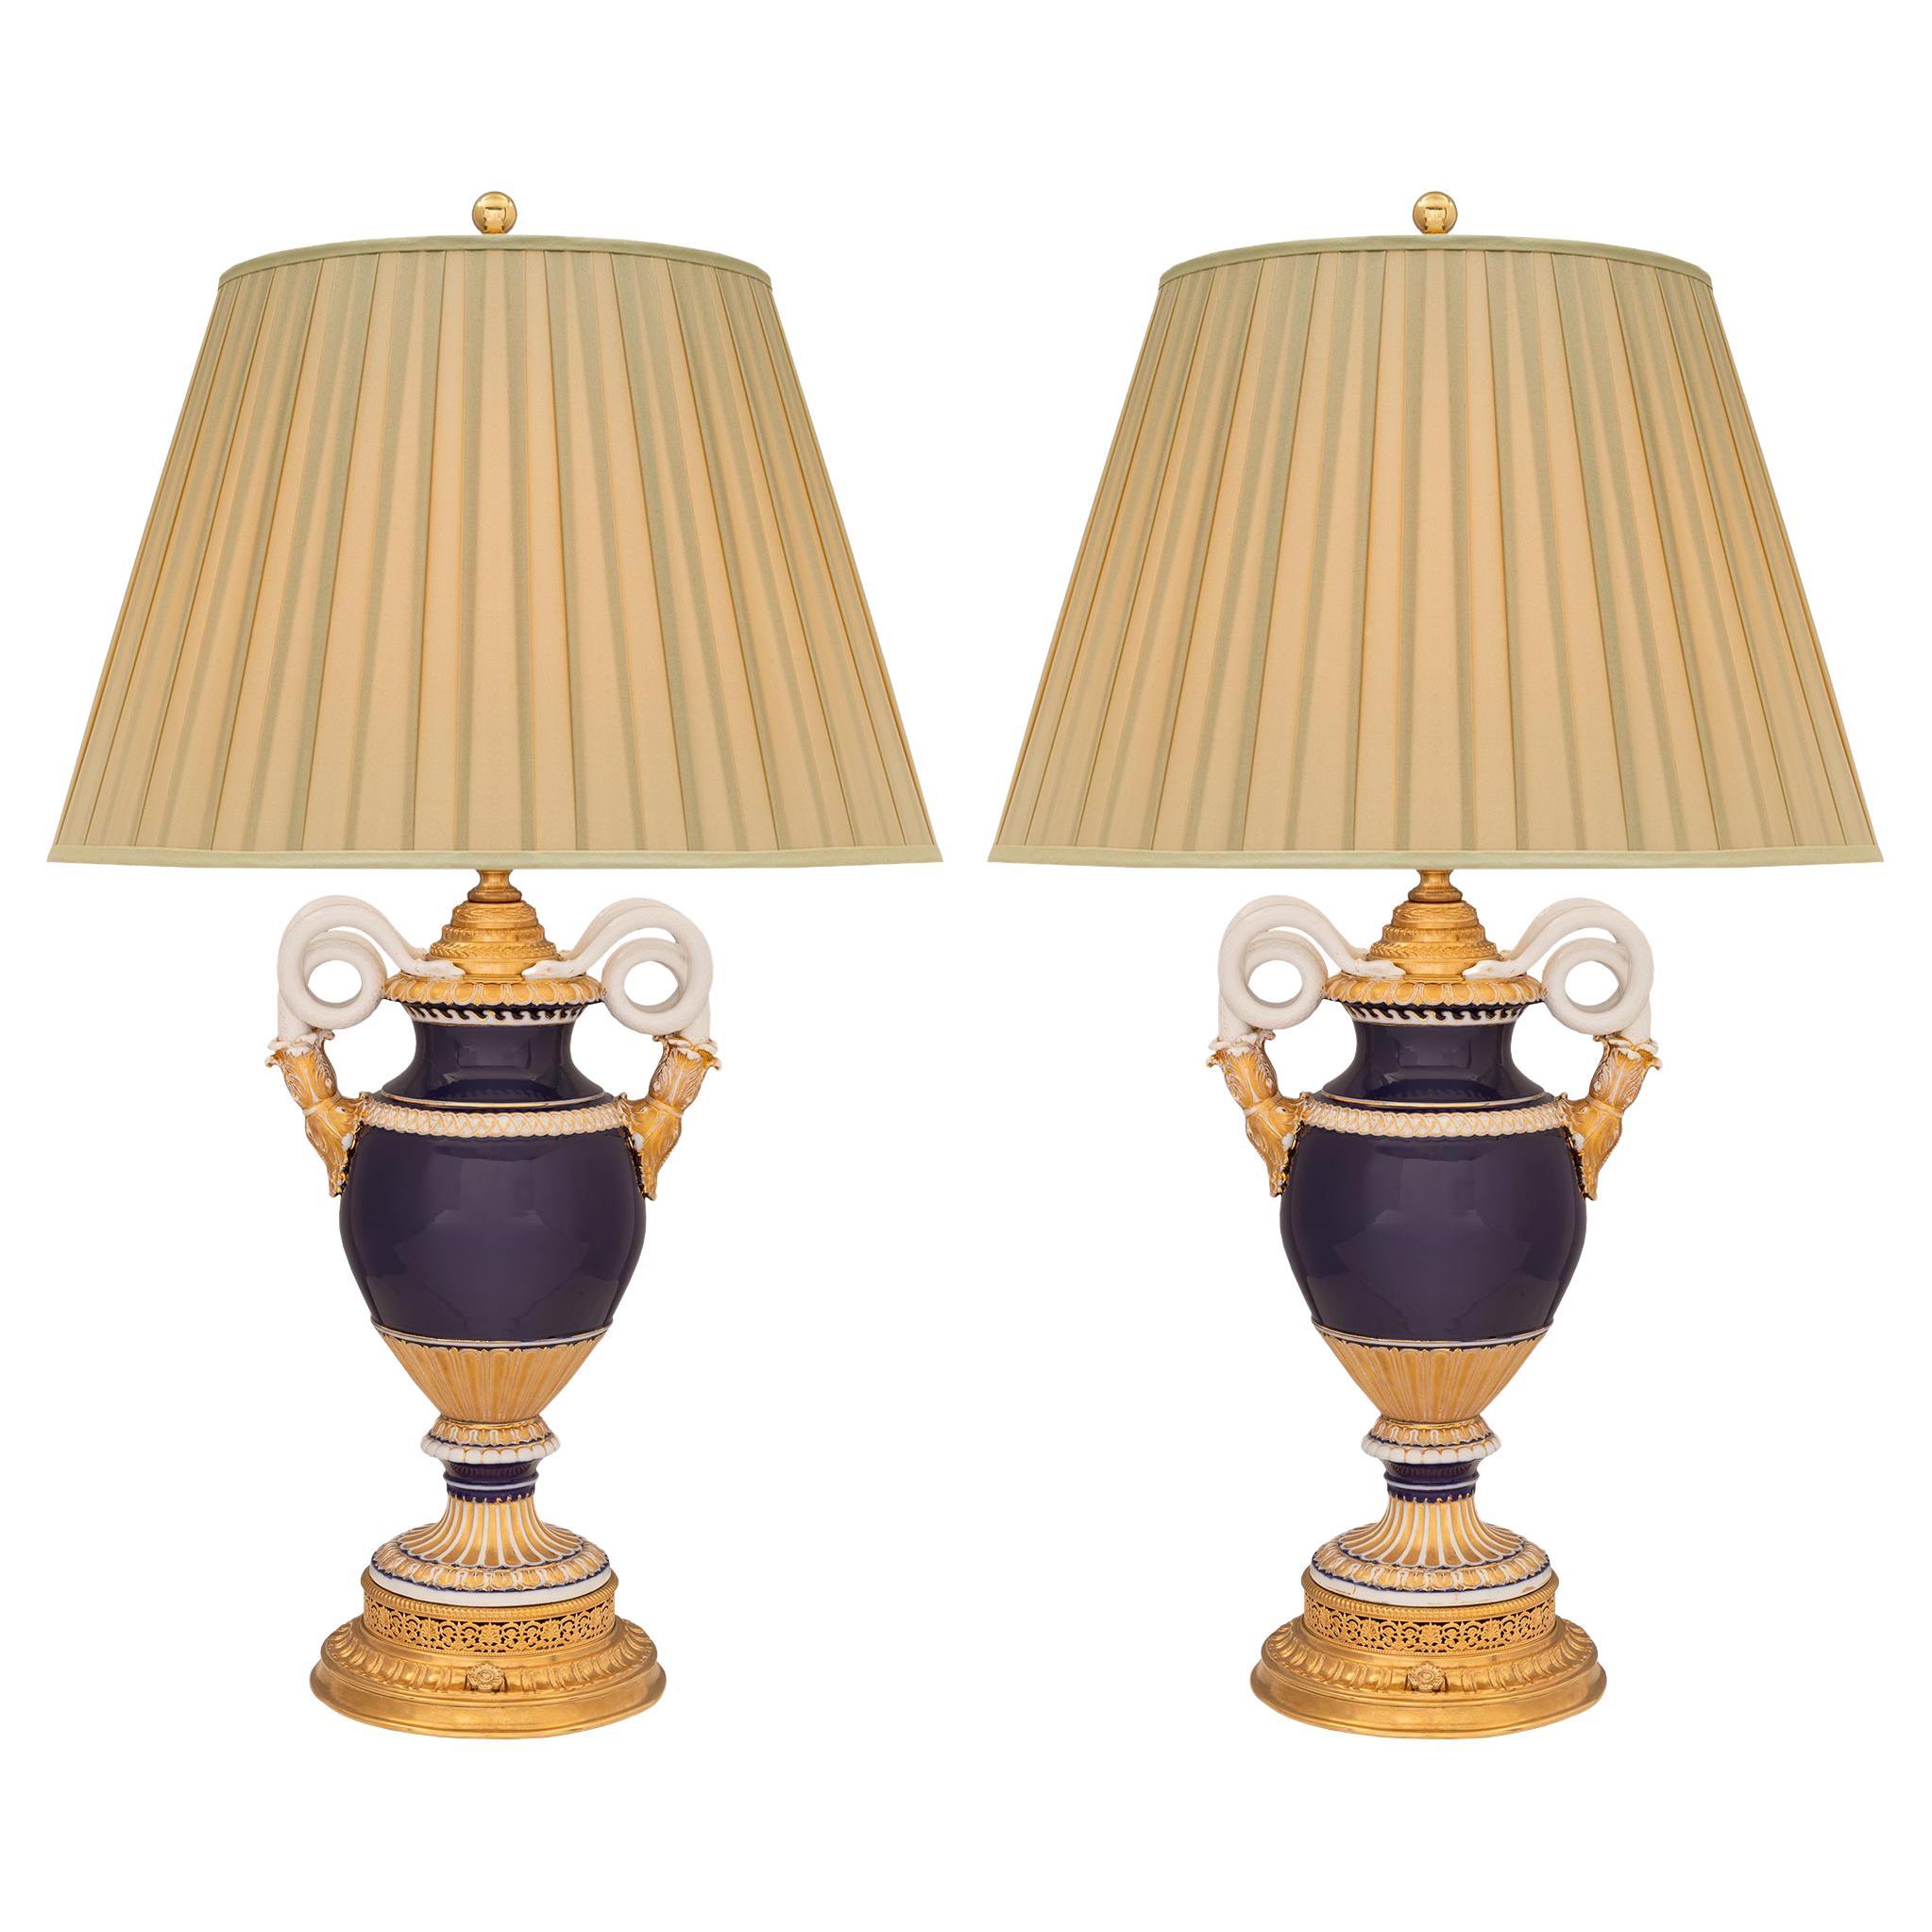 Pair of French and German Collaboration 19th Century Porcelain and Ormolu Lamps